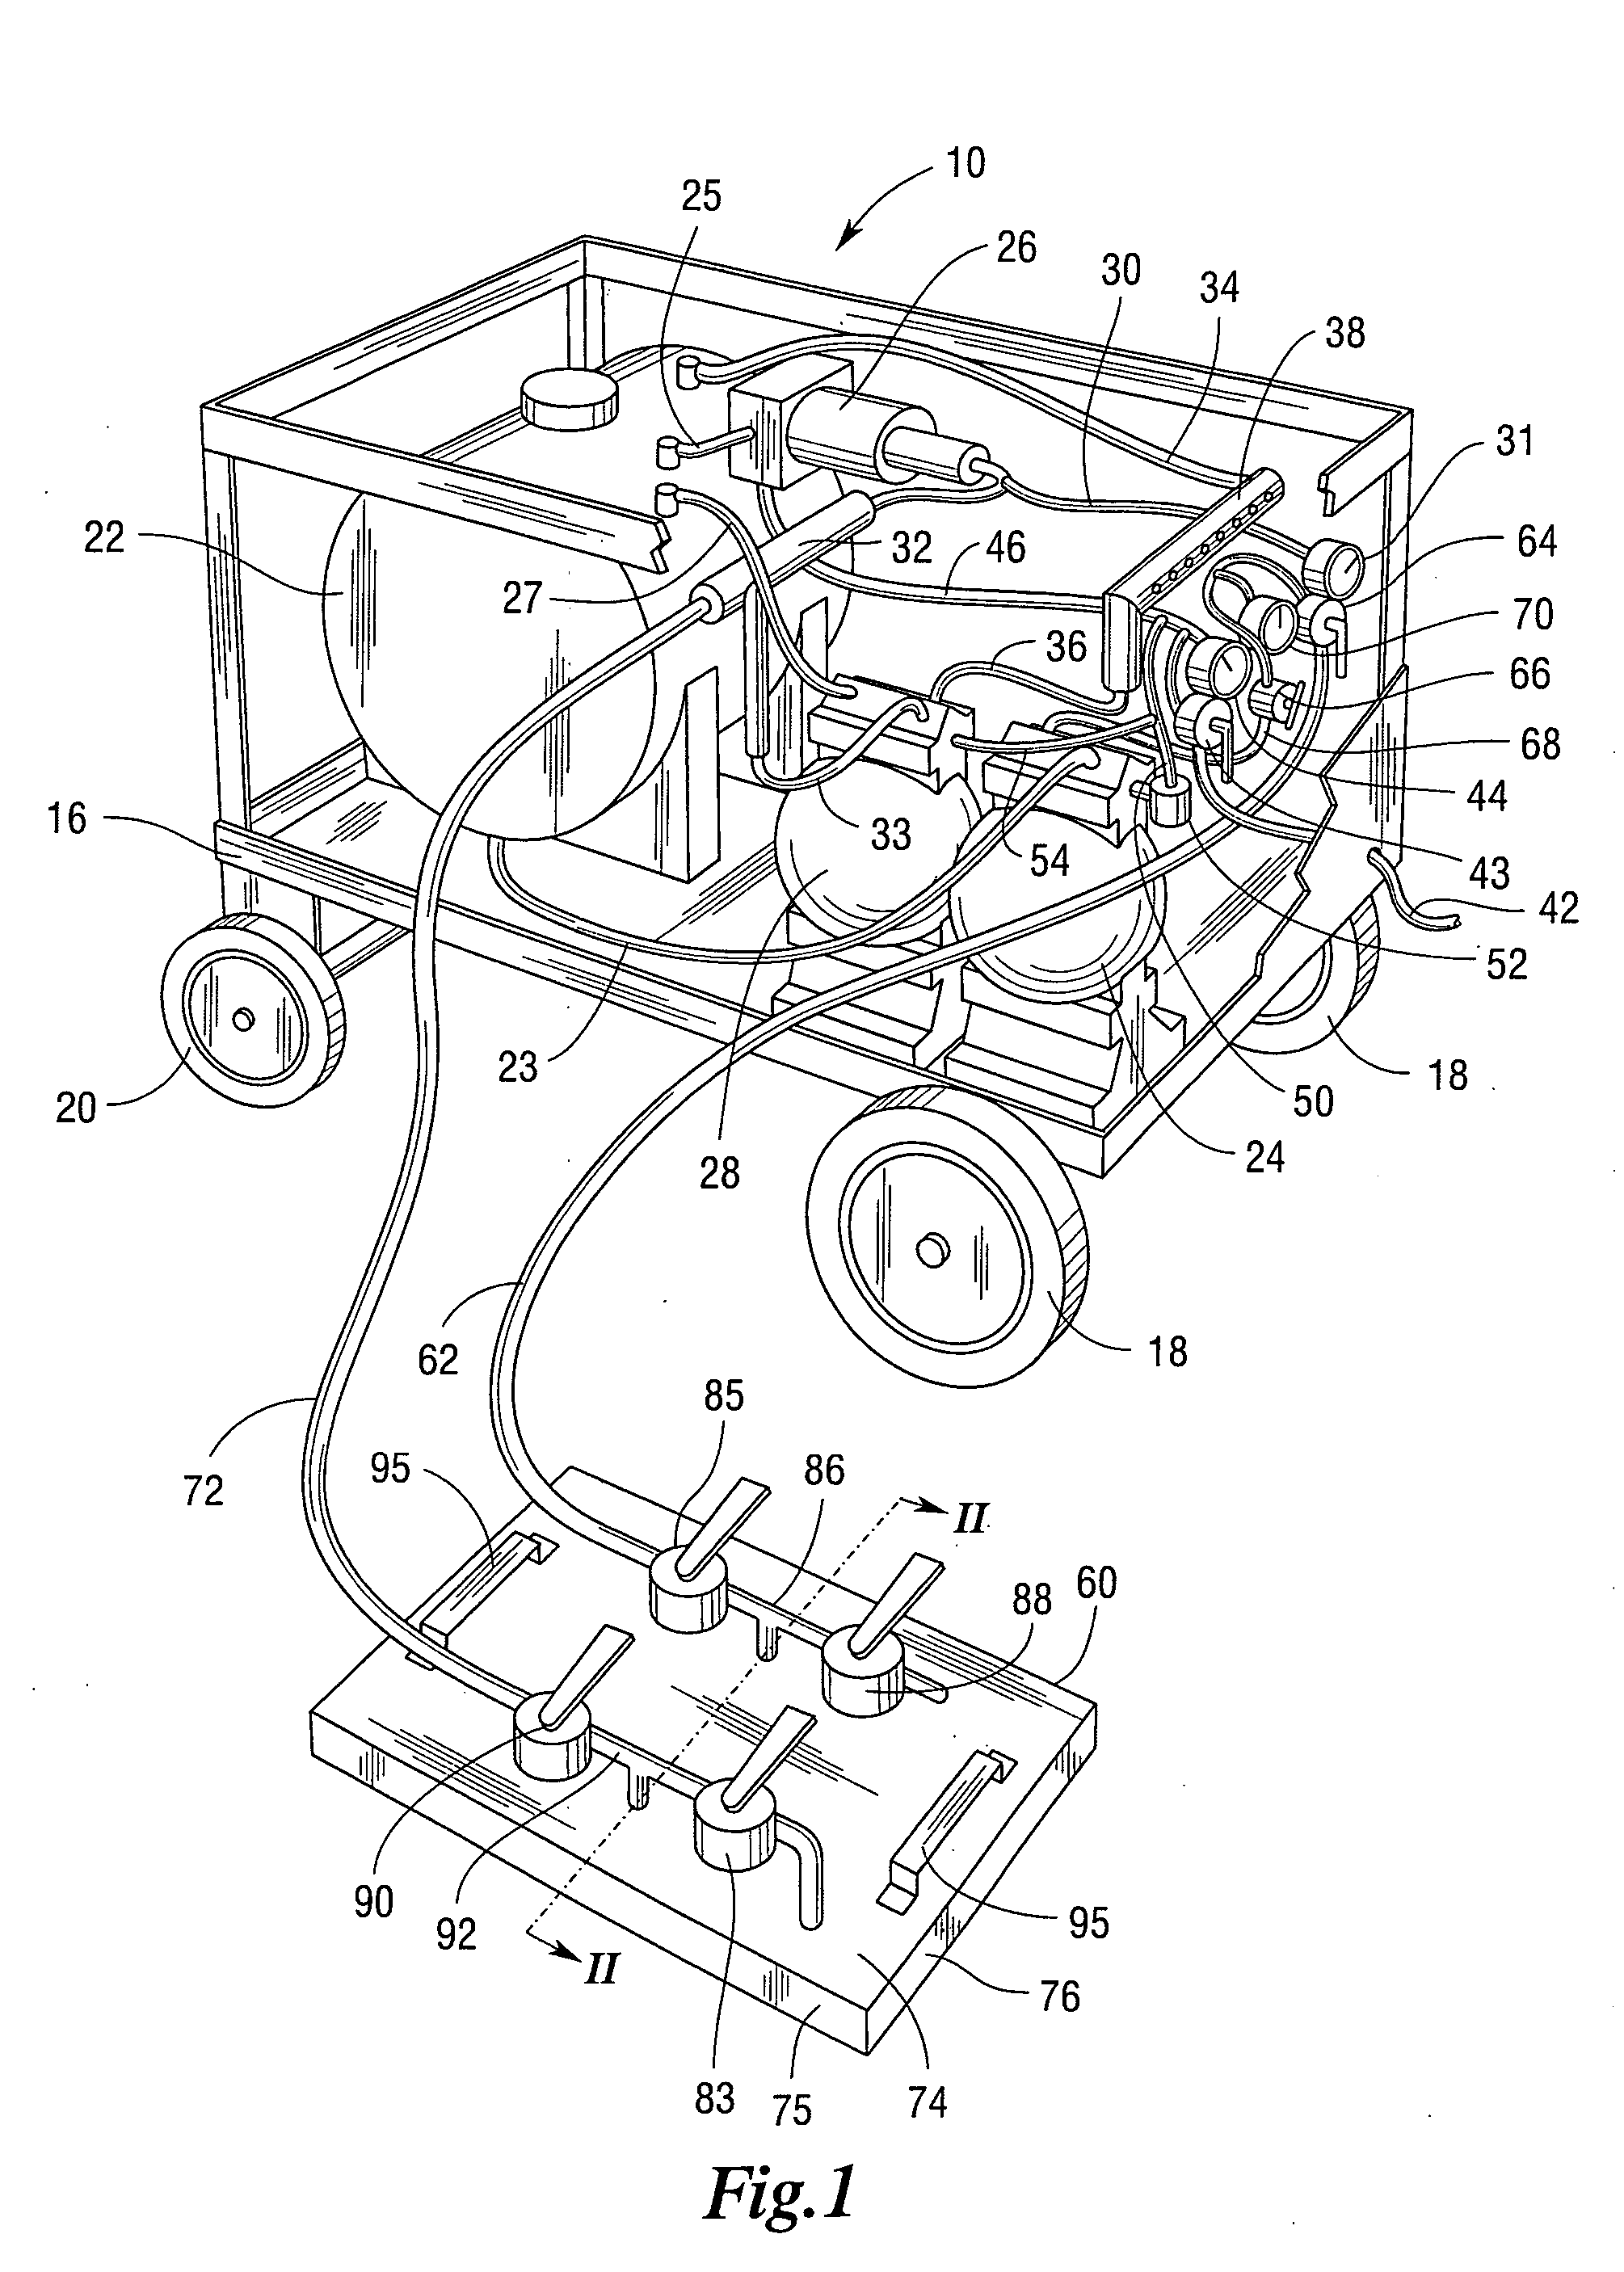 Apparatus and method for treating and impregnating porous structures